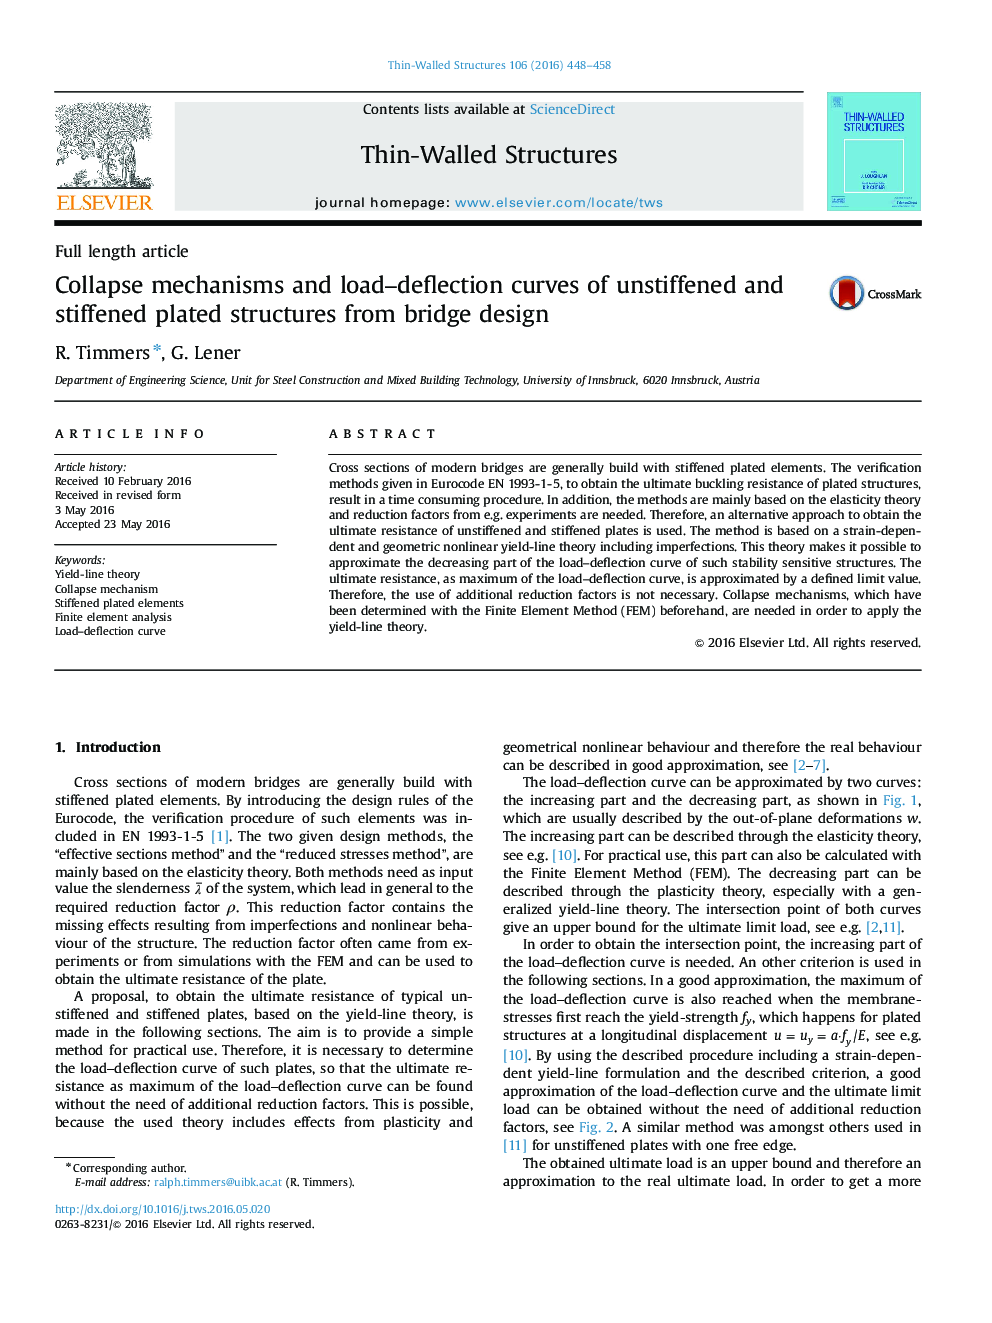 Collapse mechanisms and load–deflection curves of unstiffened and stiffened plated structures from bridge design